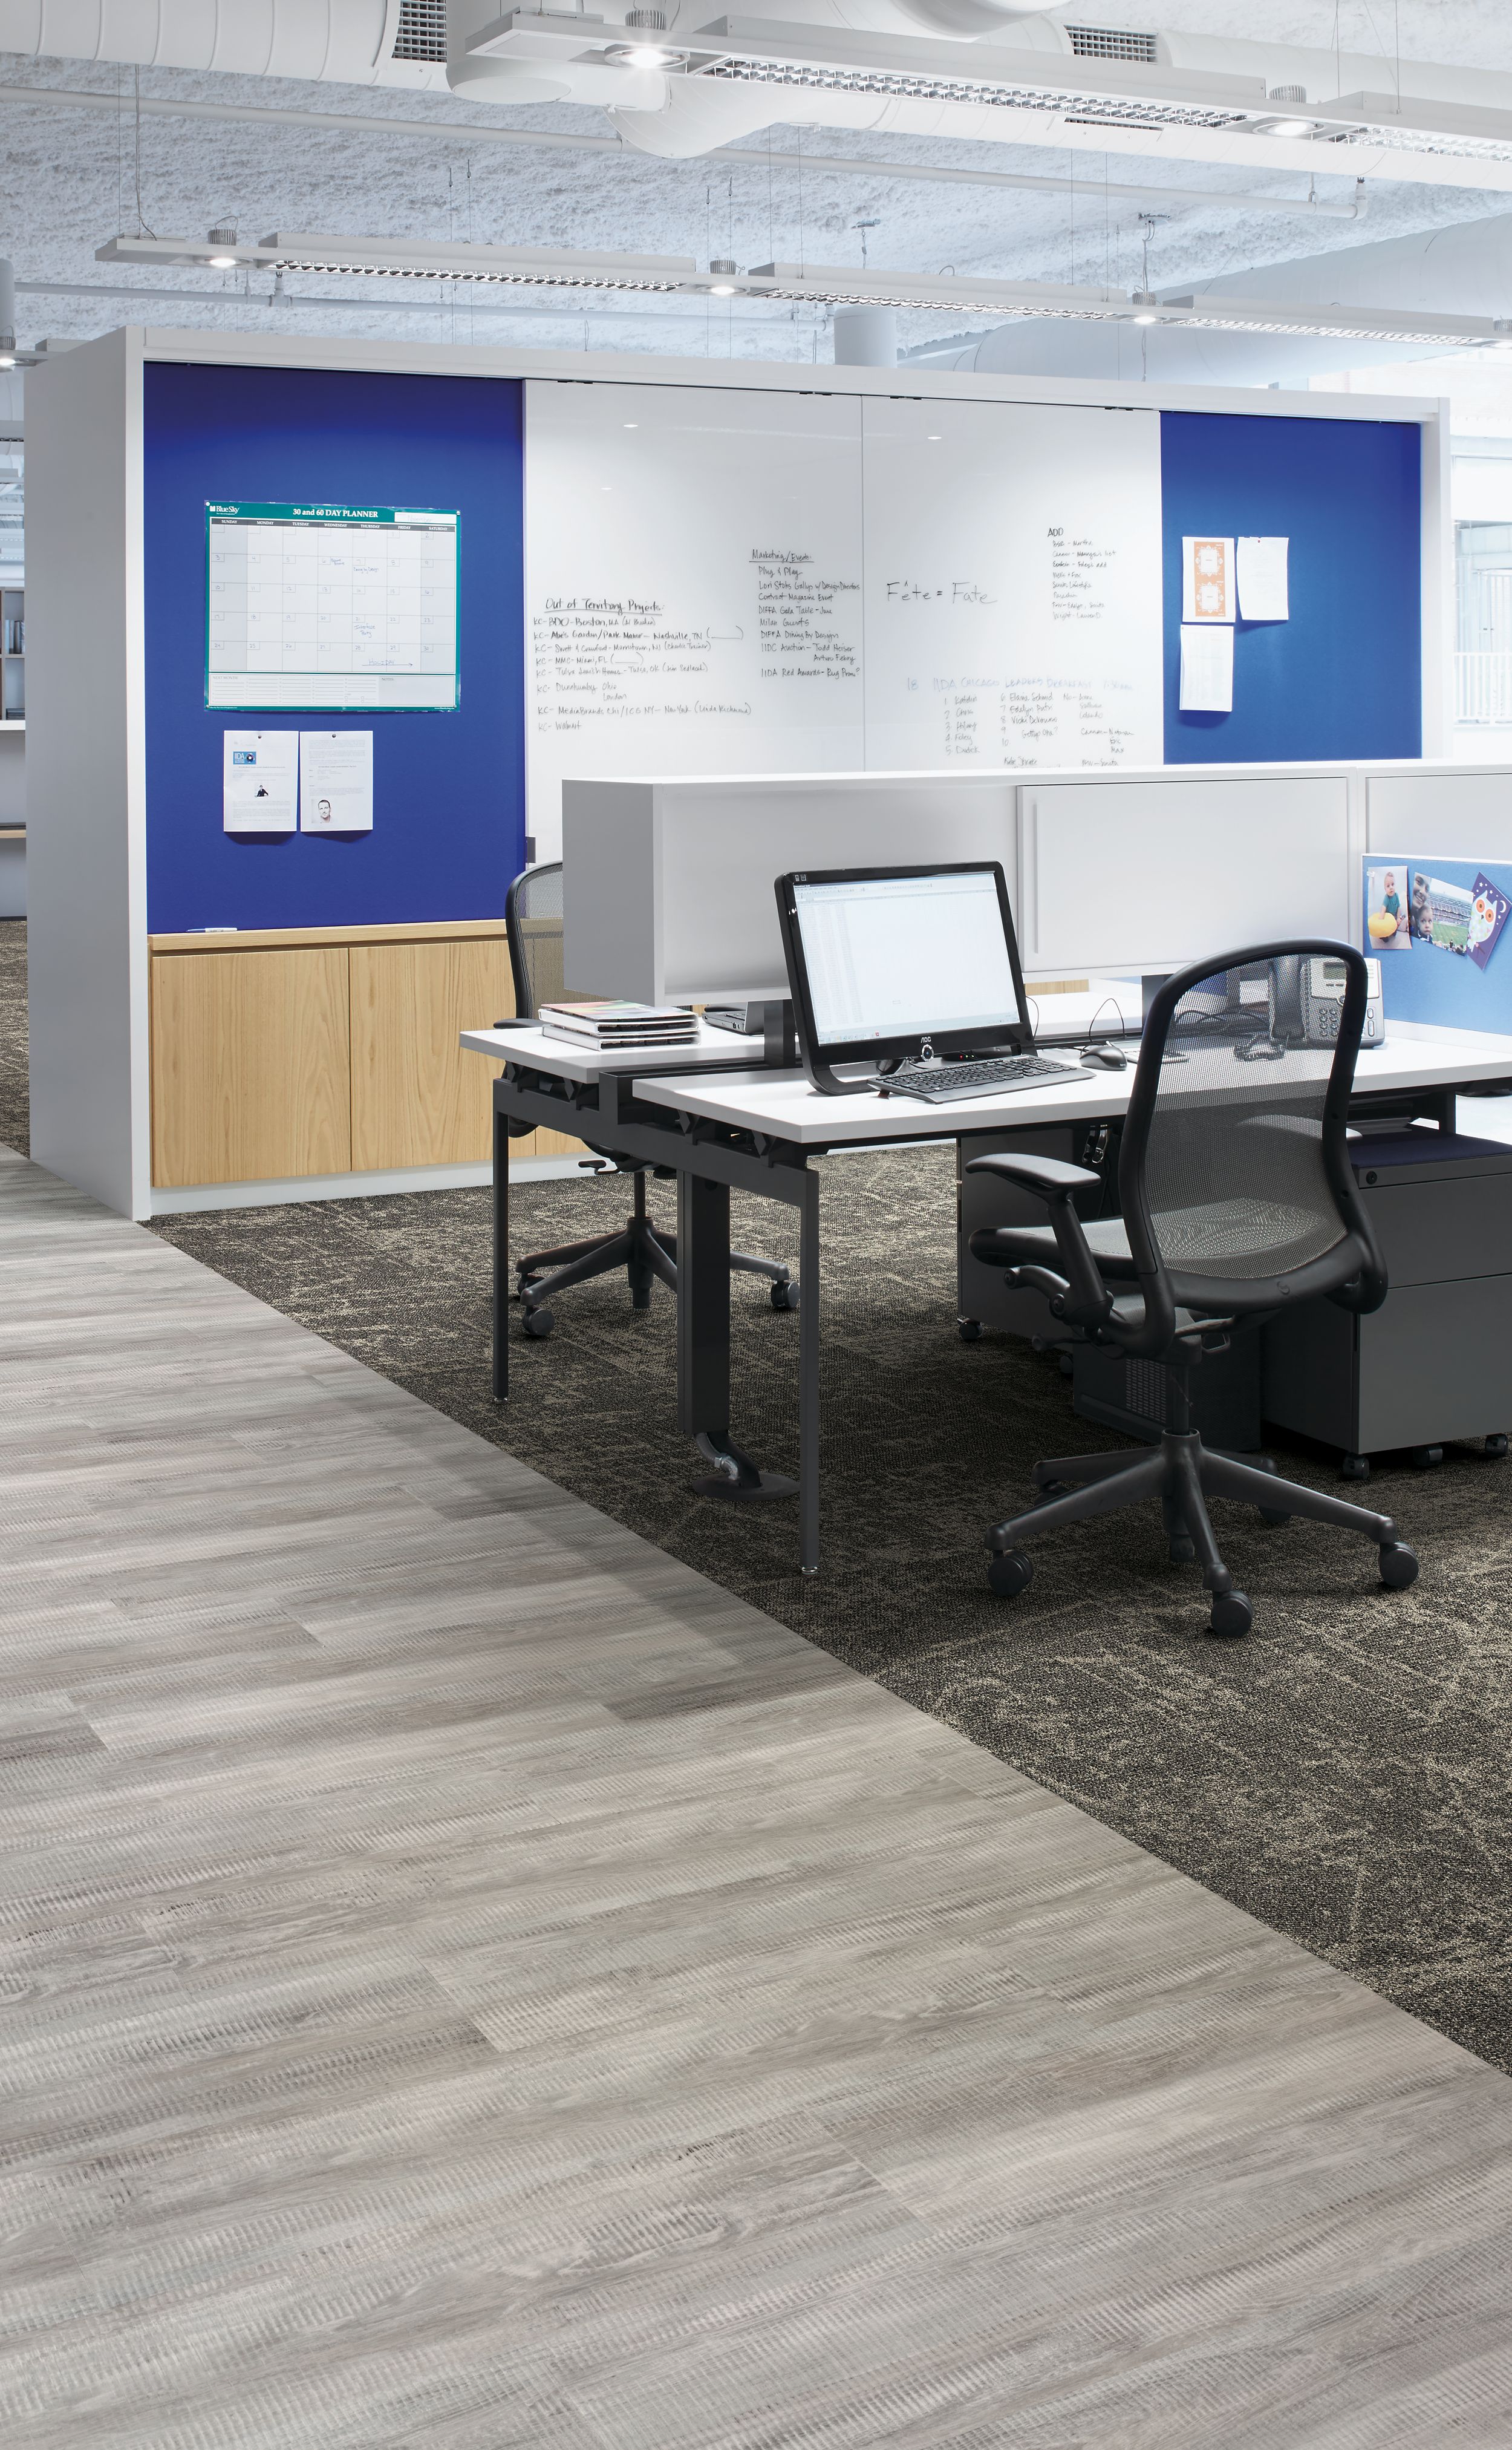 Interface Ice Breaker carpet tile and Textured Woodgrains LVT in desk area with whiteboard in background imagen número 4